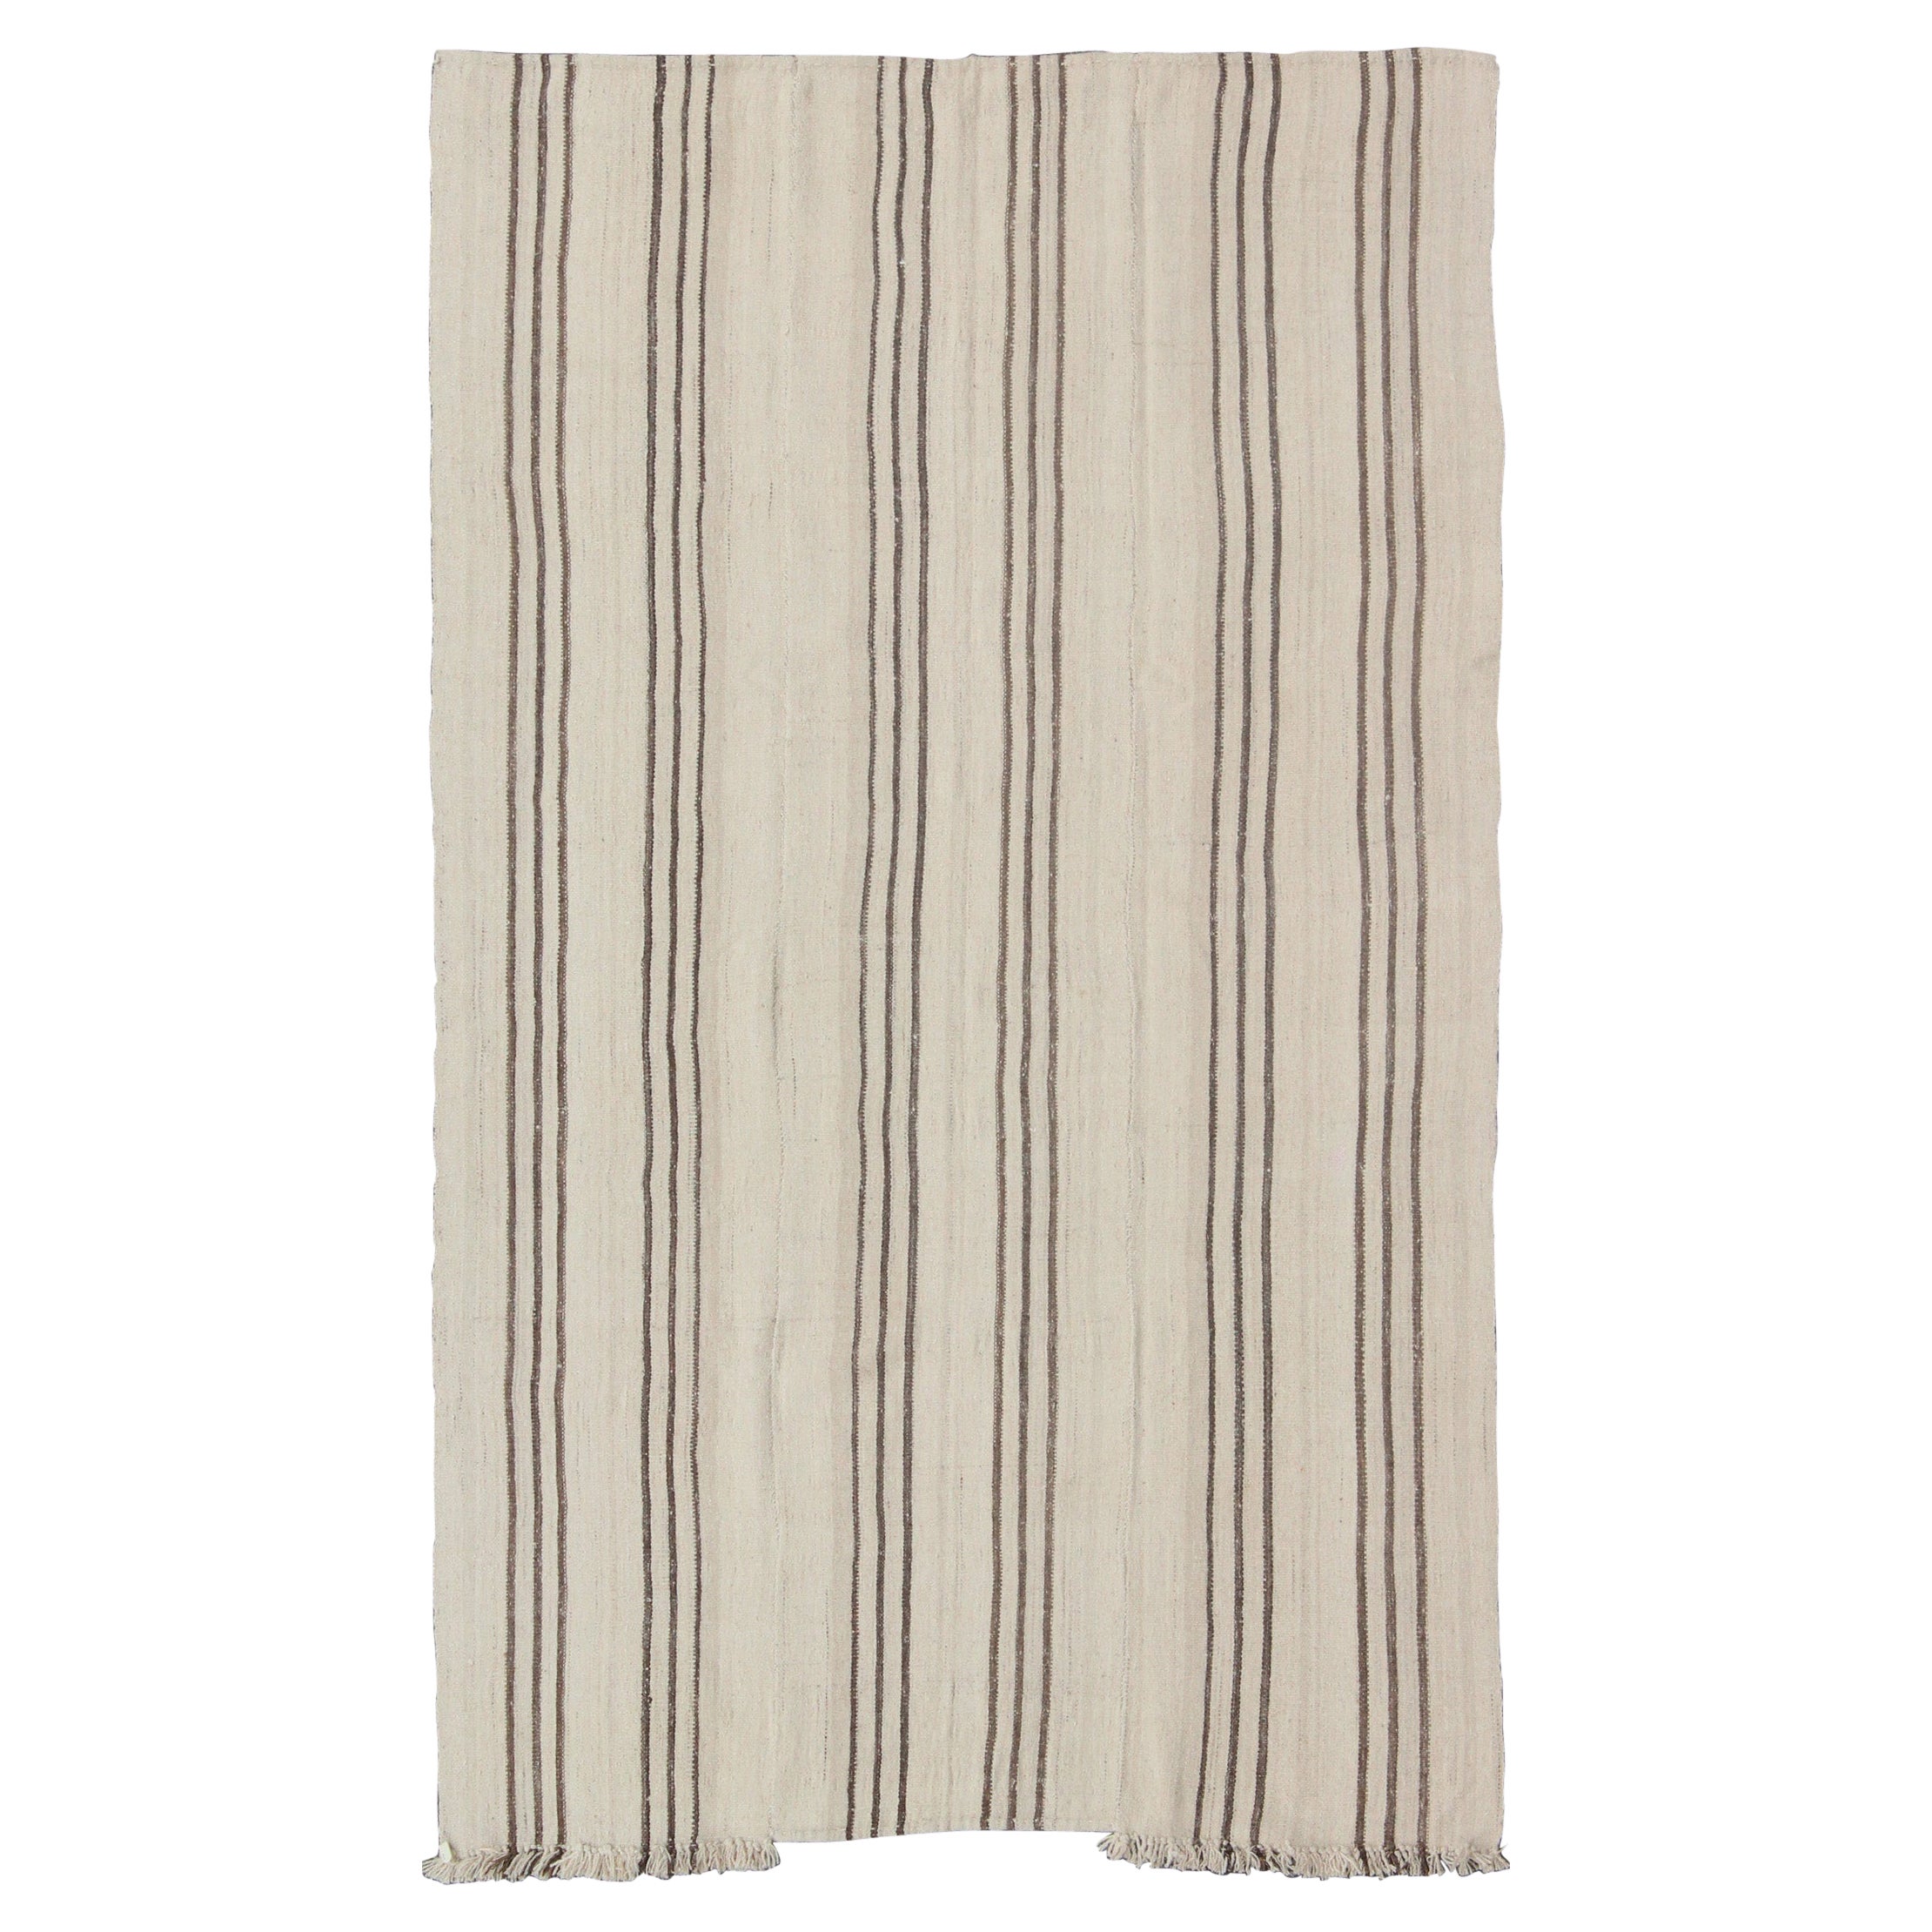 Striped Turkish Vintage Kilim Flat-Weave Rug in Shades of Browns and Ivory For Sale